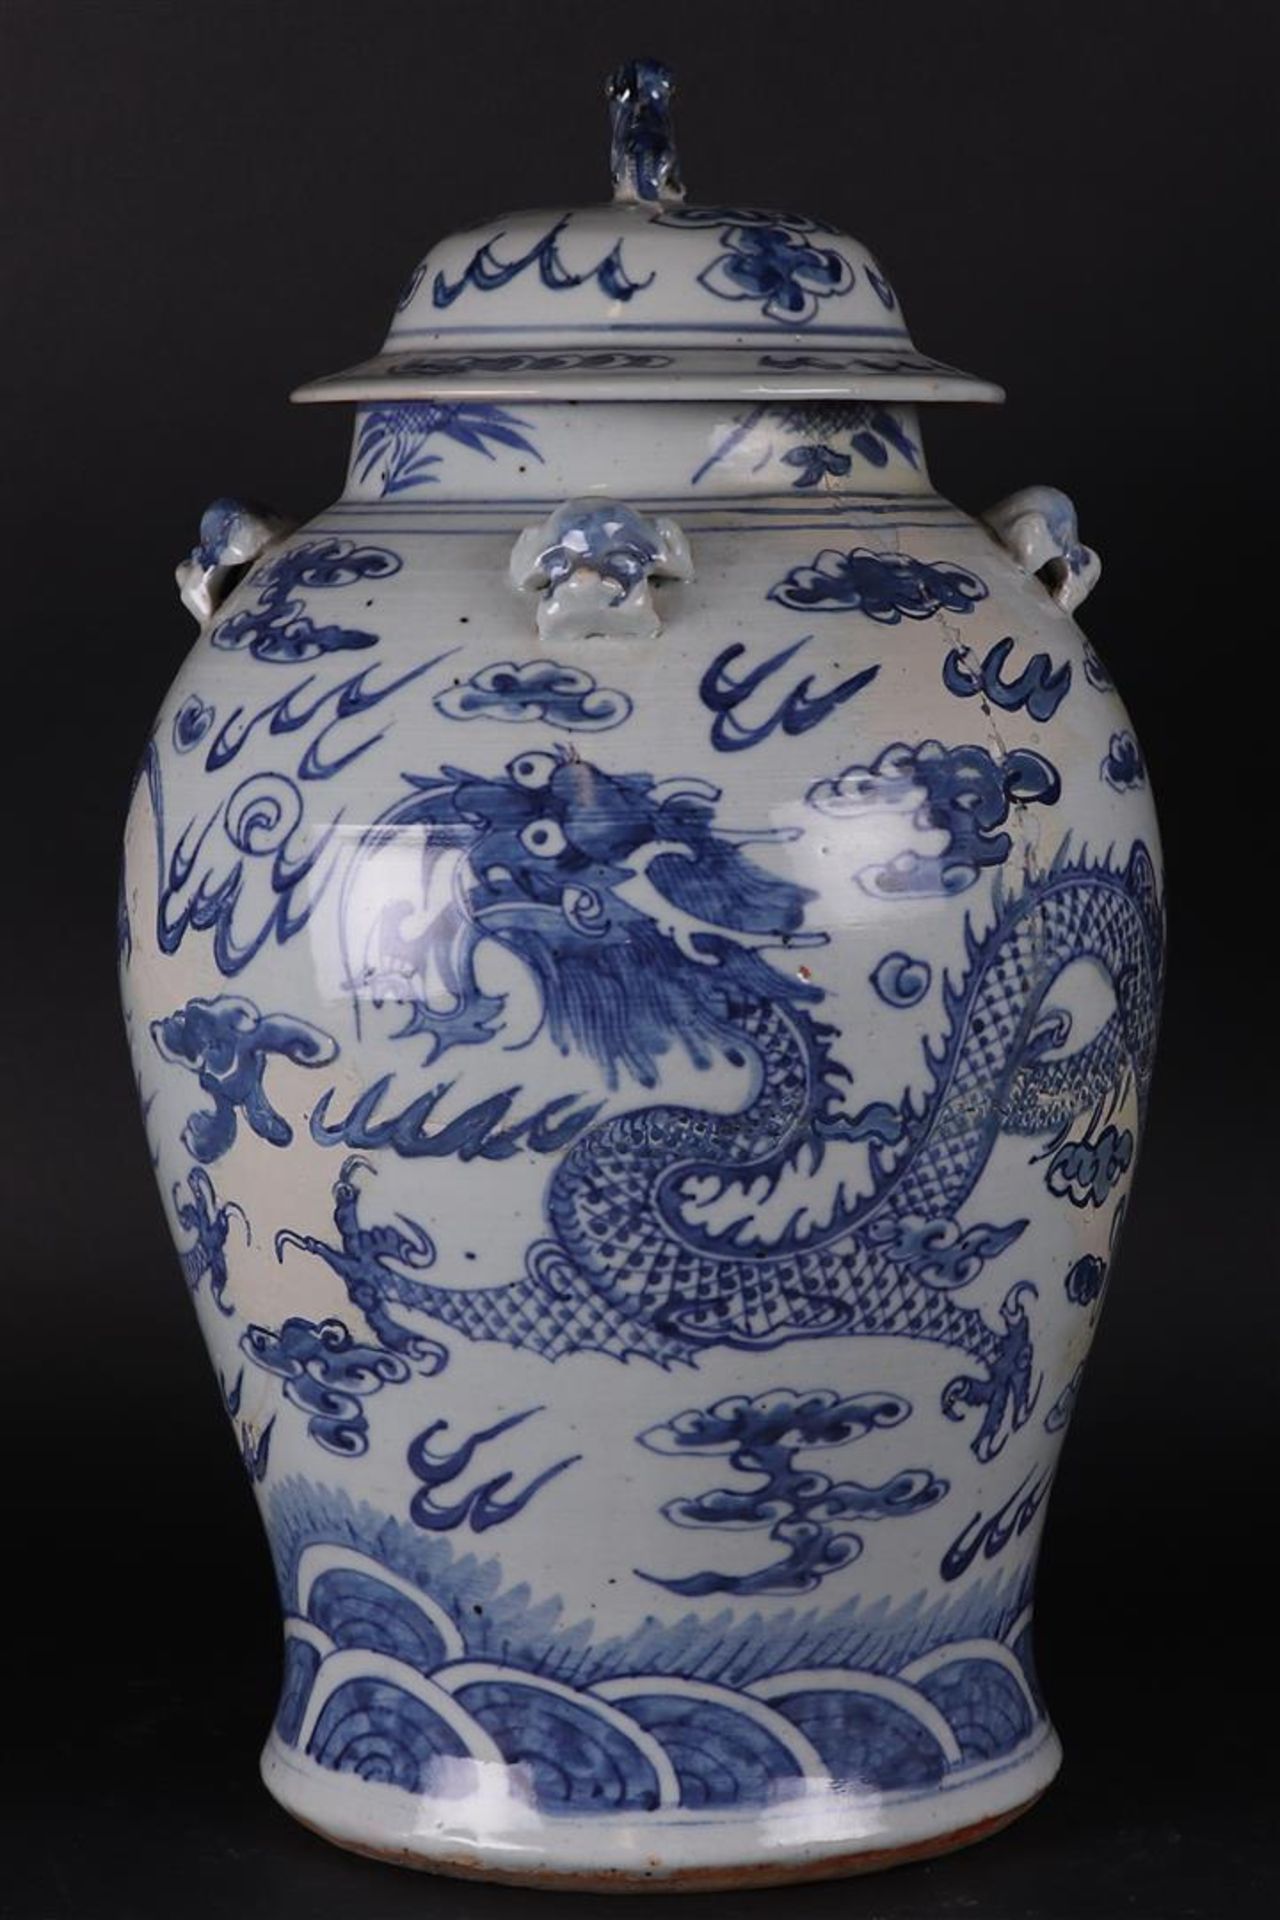 A large porcelain lidded vase decorated with dragons. China, 19th century. - Image 2 of 6